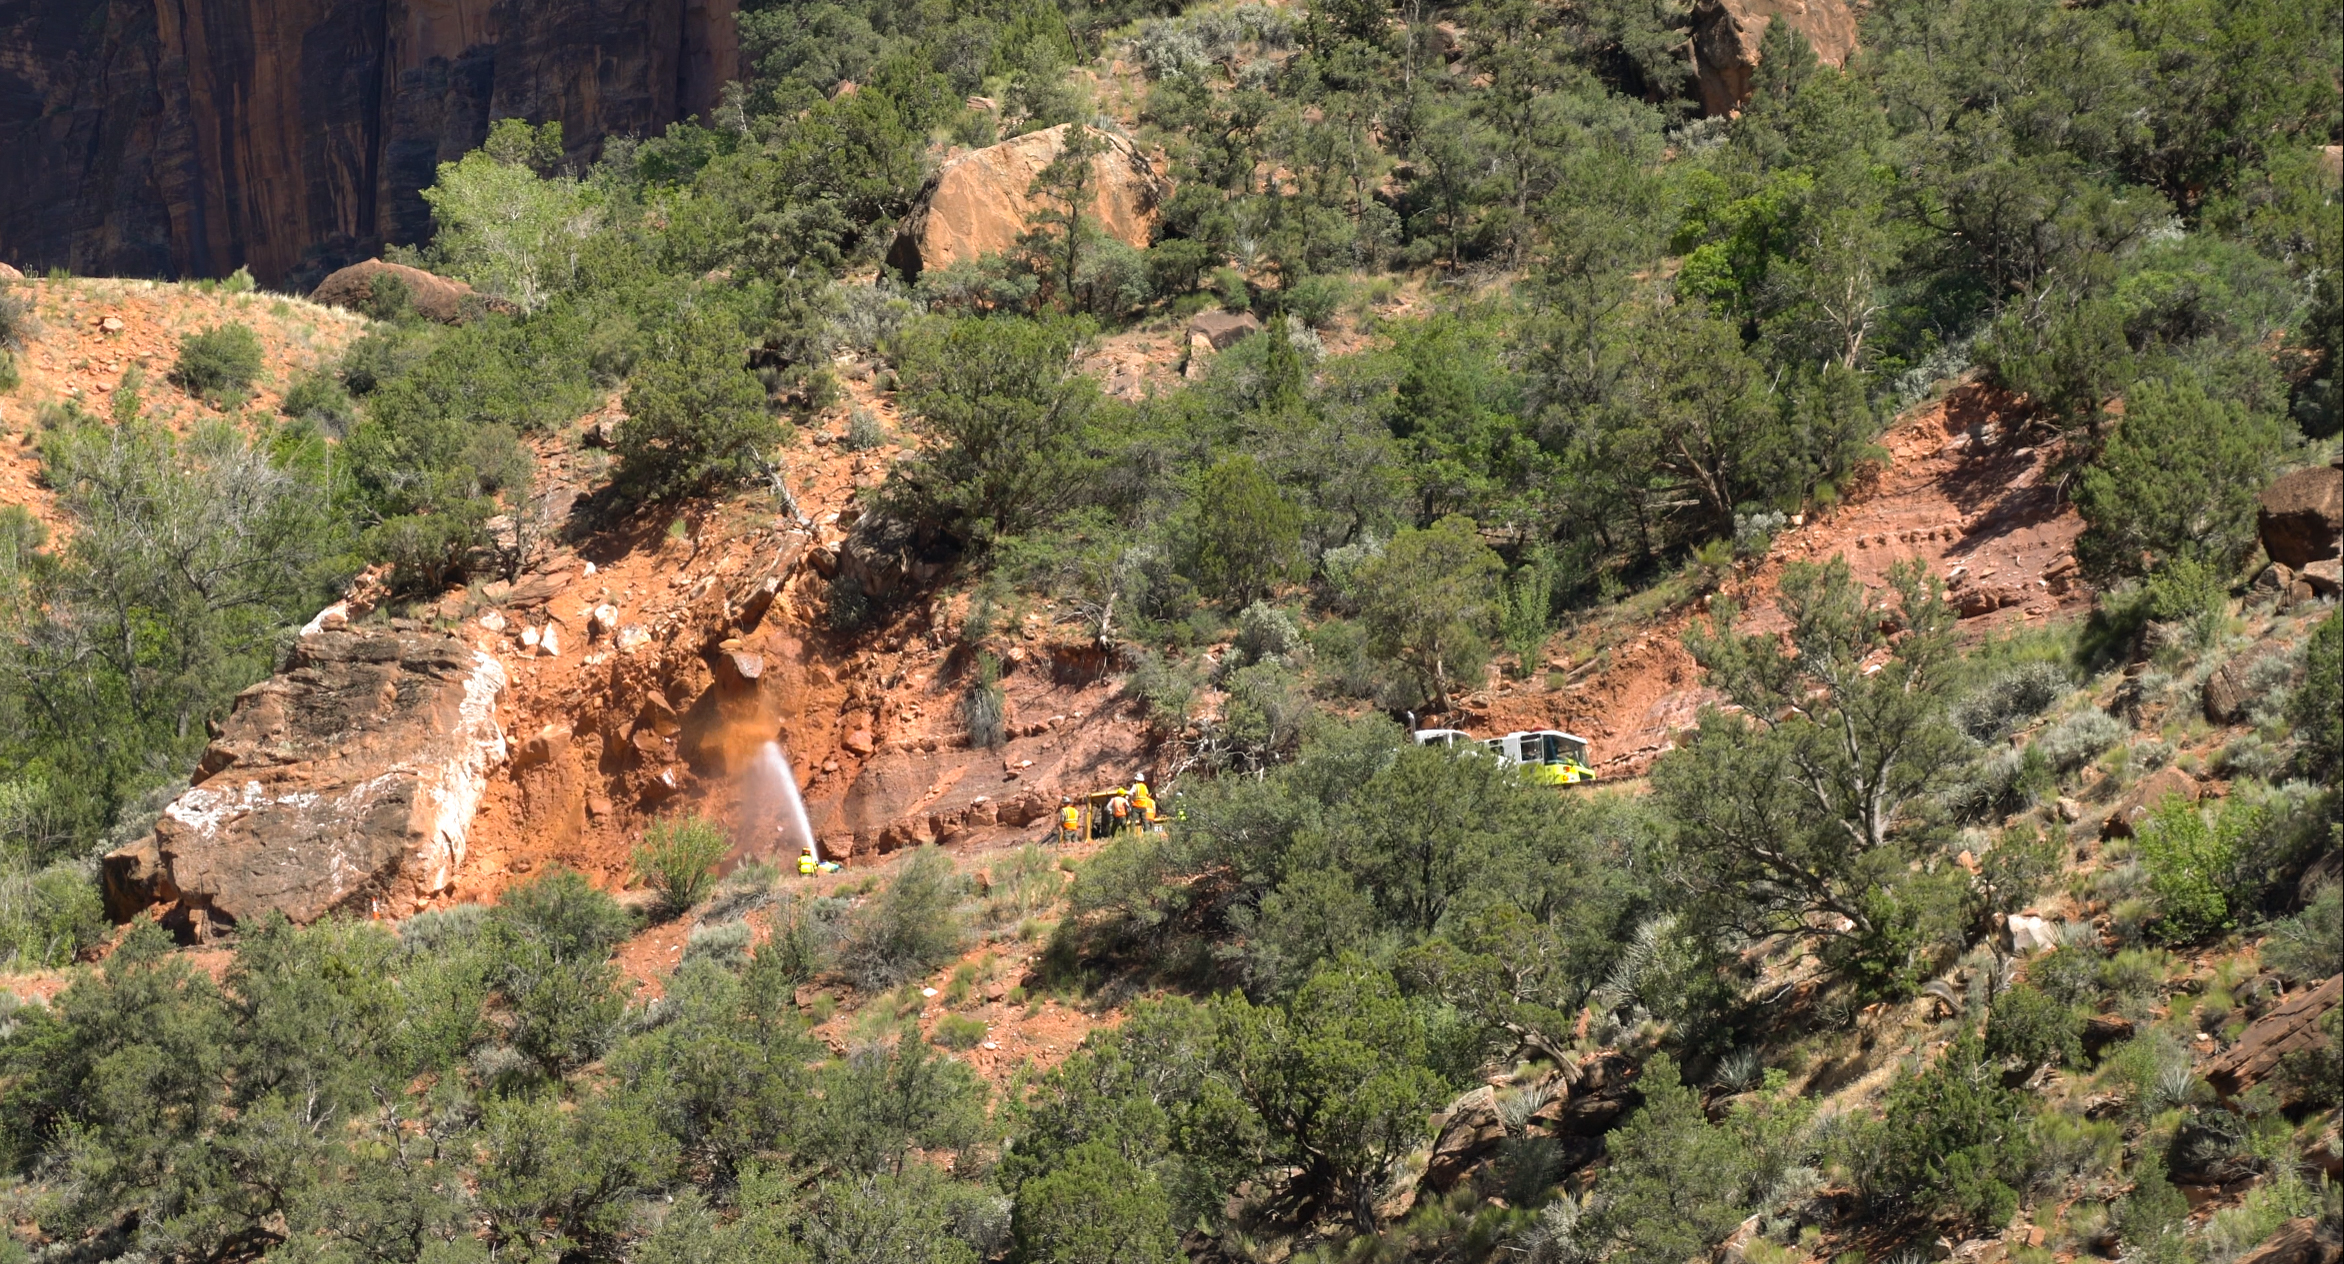 National Park Service staff use water from a fire hose to dislodge loose rock above a road.